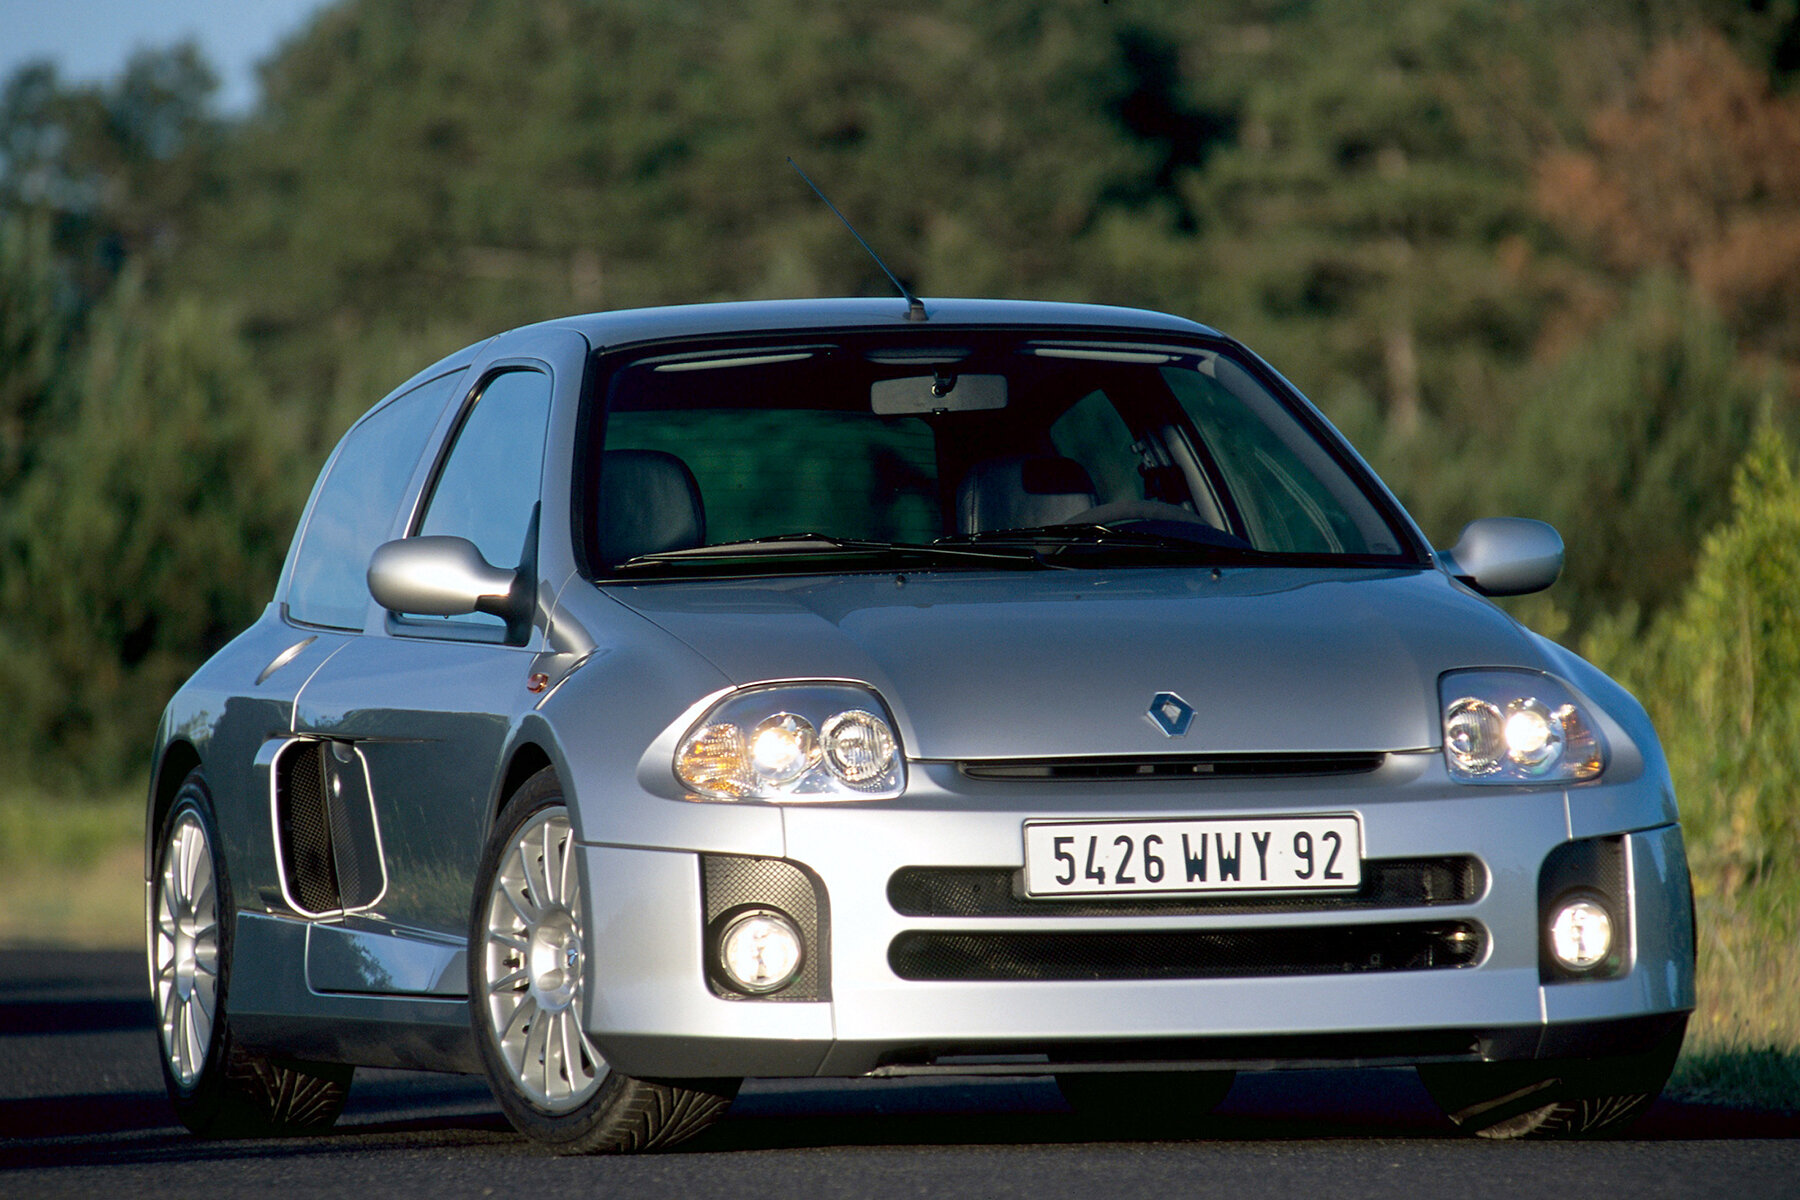 This isn’t just a Renault Clio. It’s a Renault Sport Clio V6 – more cylinders, a wider body and its engine moved behind the driver.